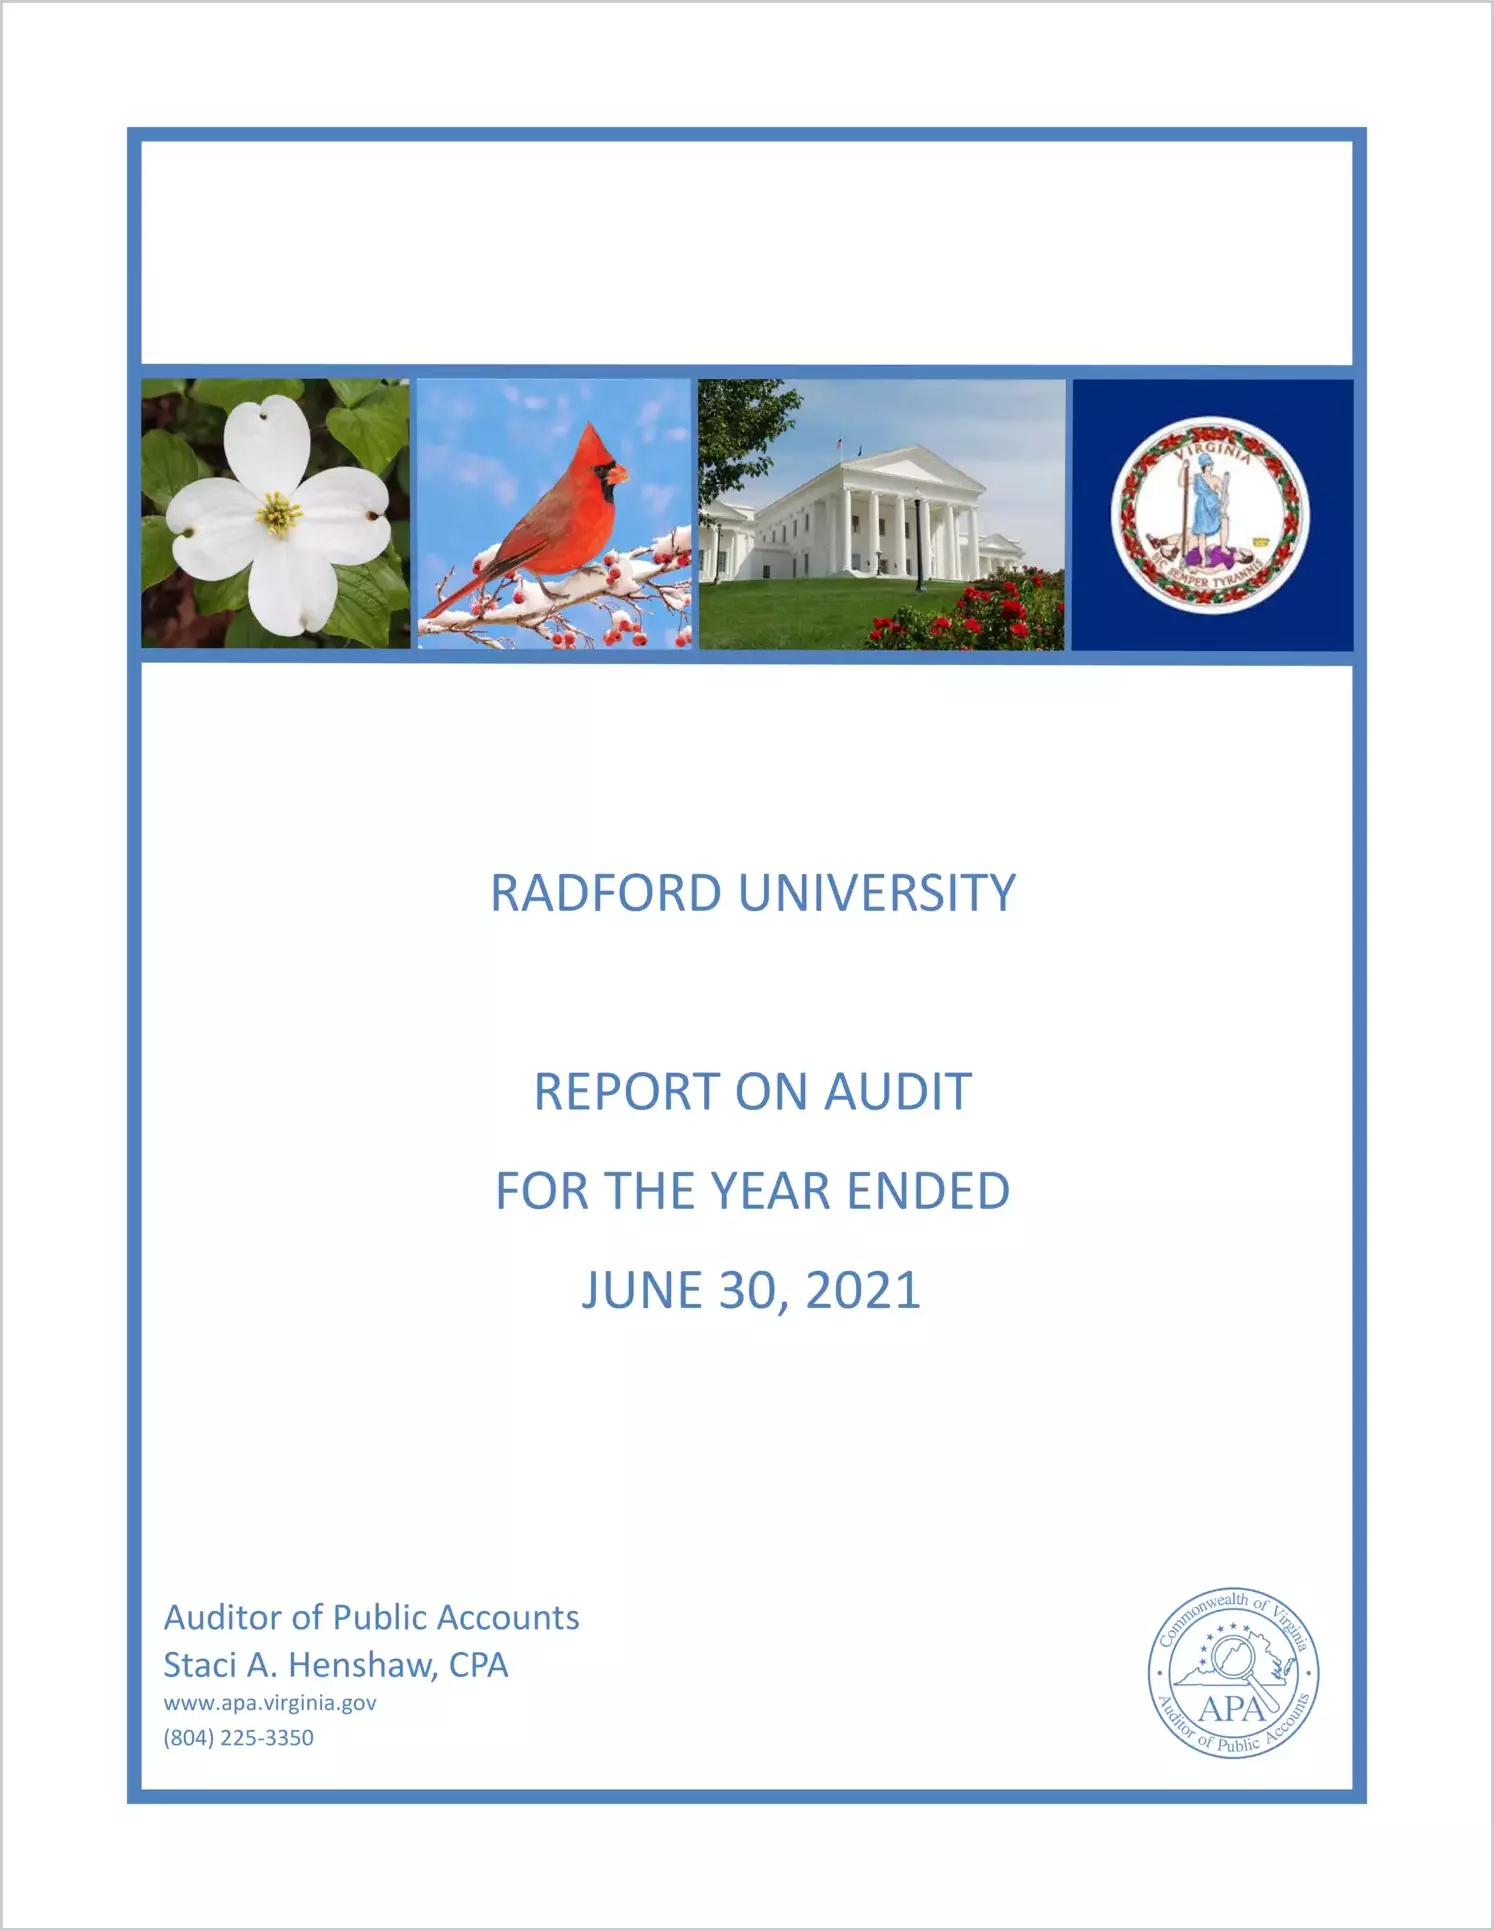 Radford University for the year ended June 30, 2021